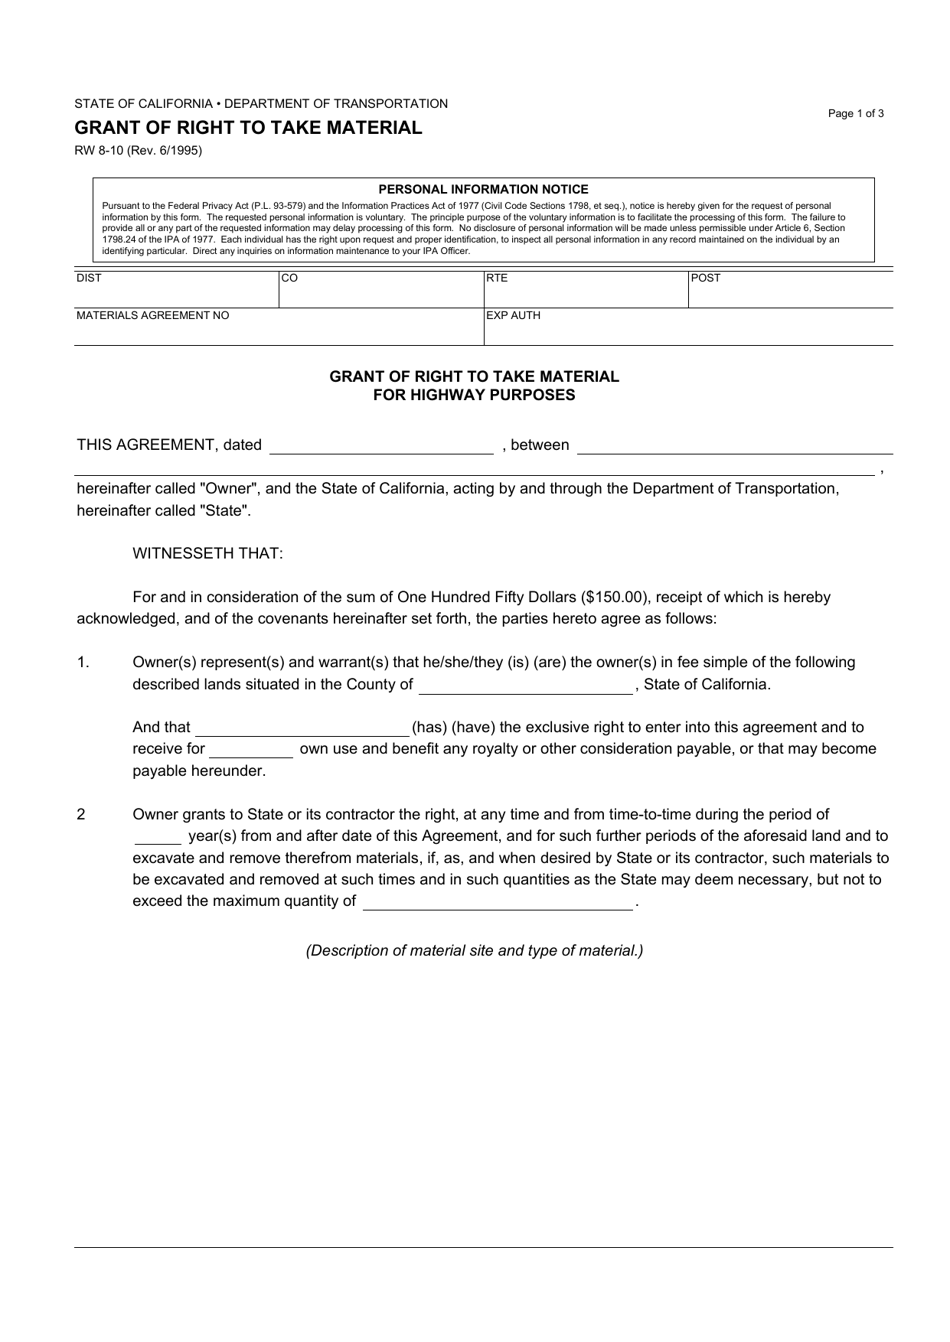 Form RW8-10 Grant of Right to Take Material - California, Page 1